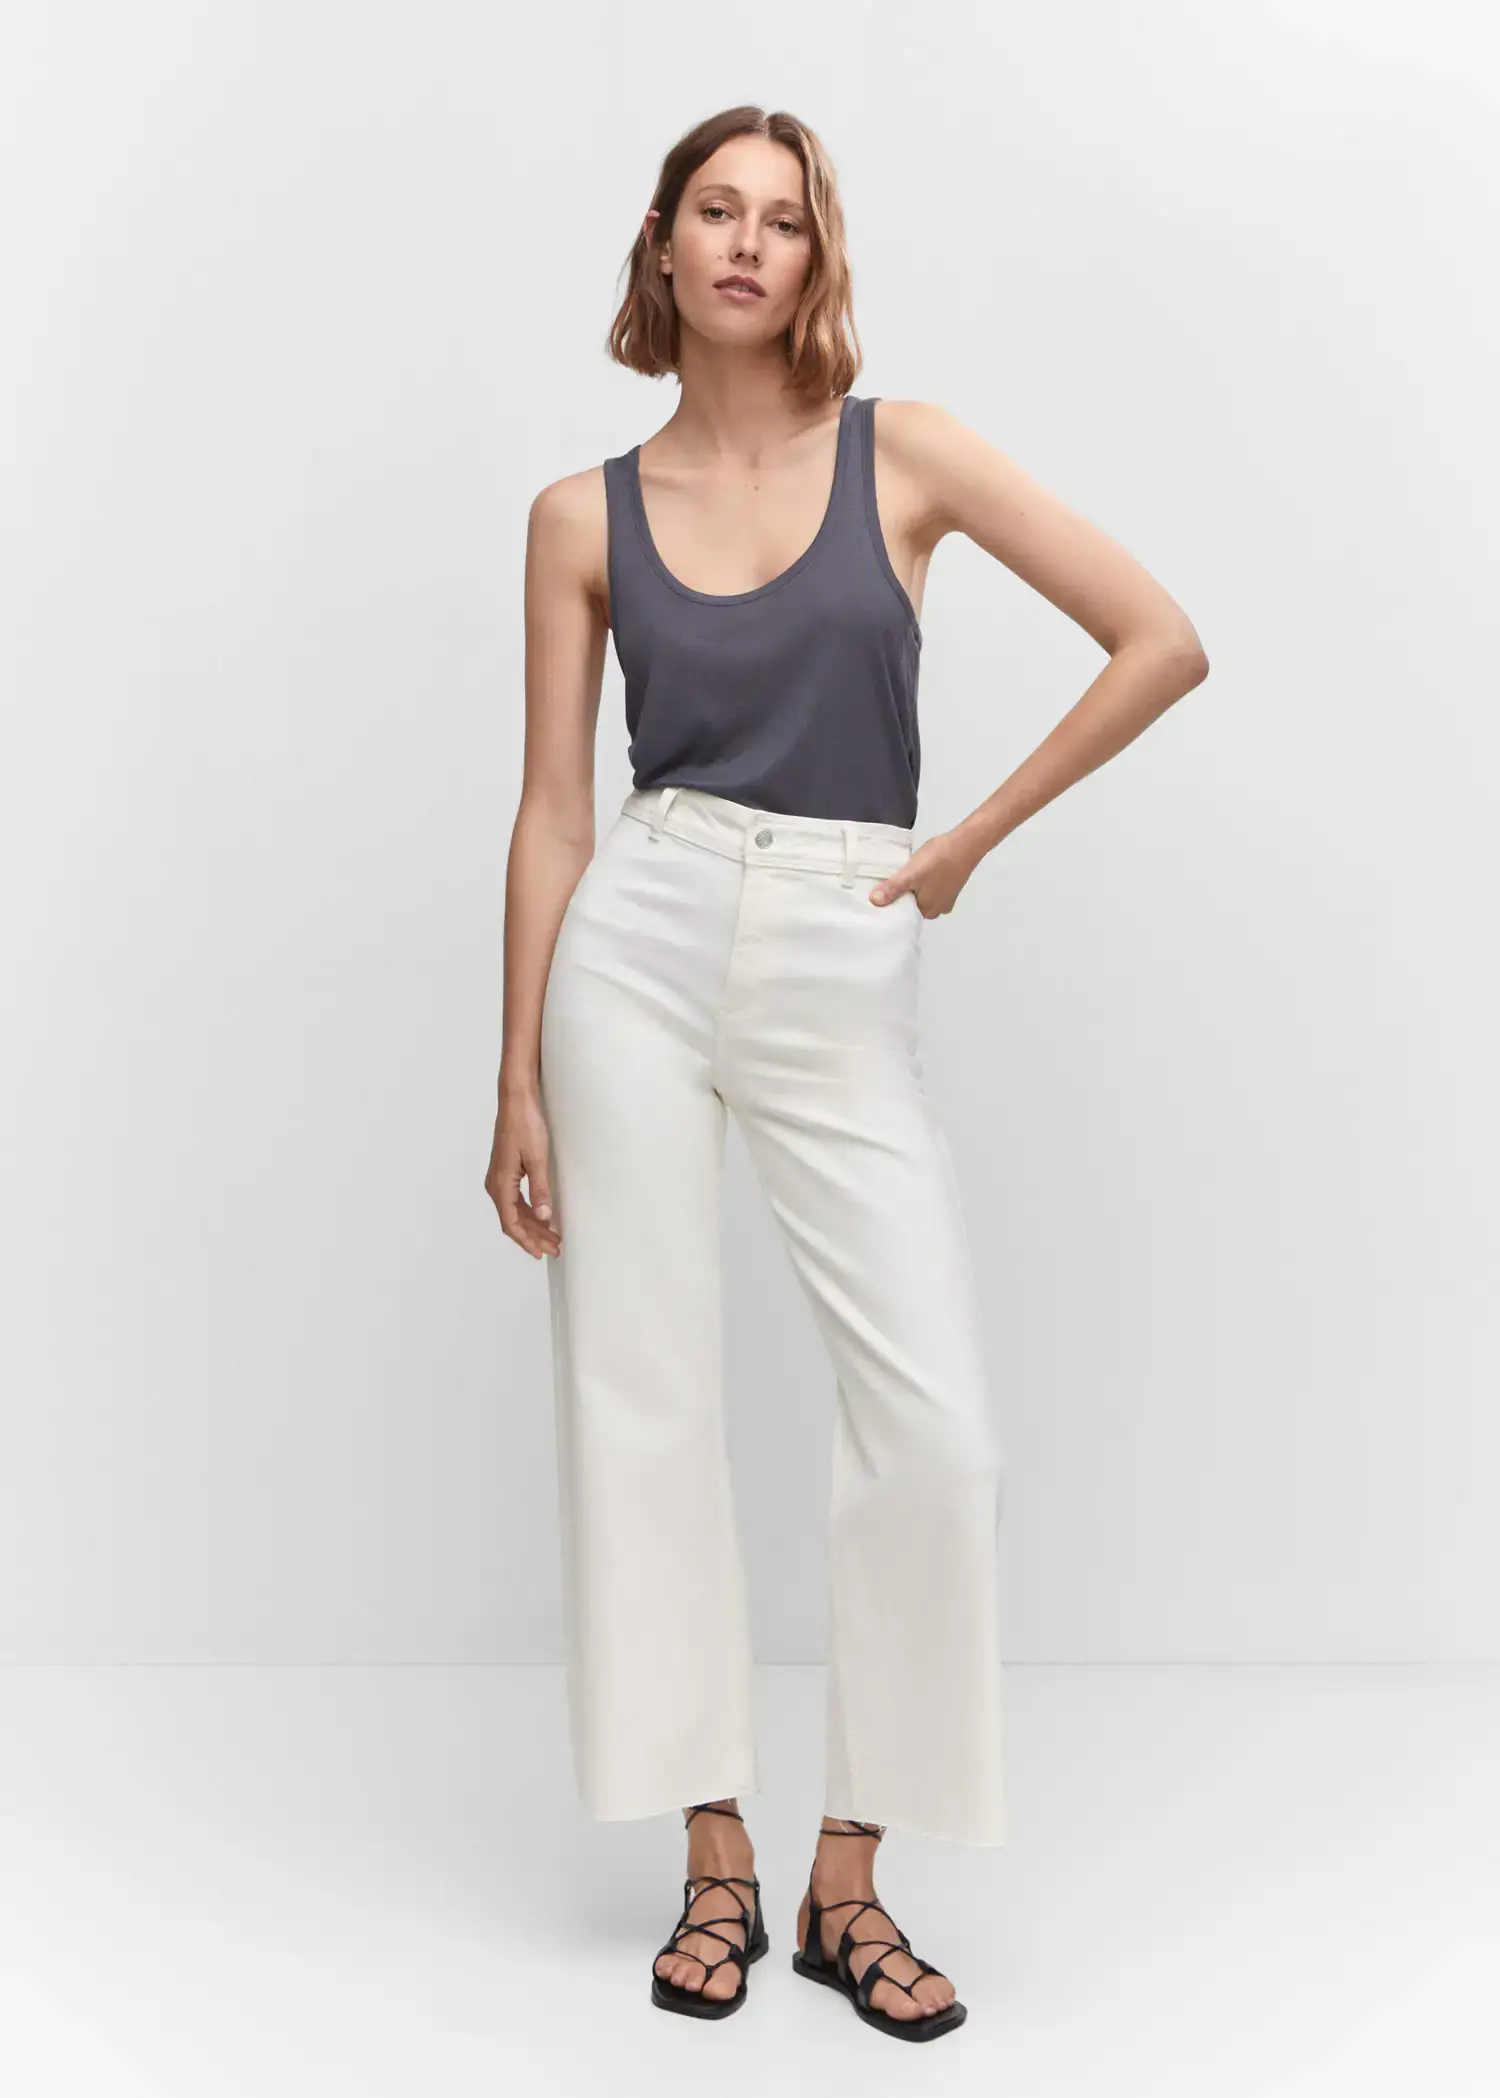 Mango Jeans culotte high waist. a woman standing in front of a white wall. 